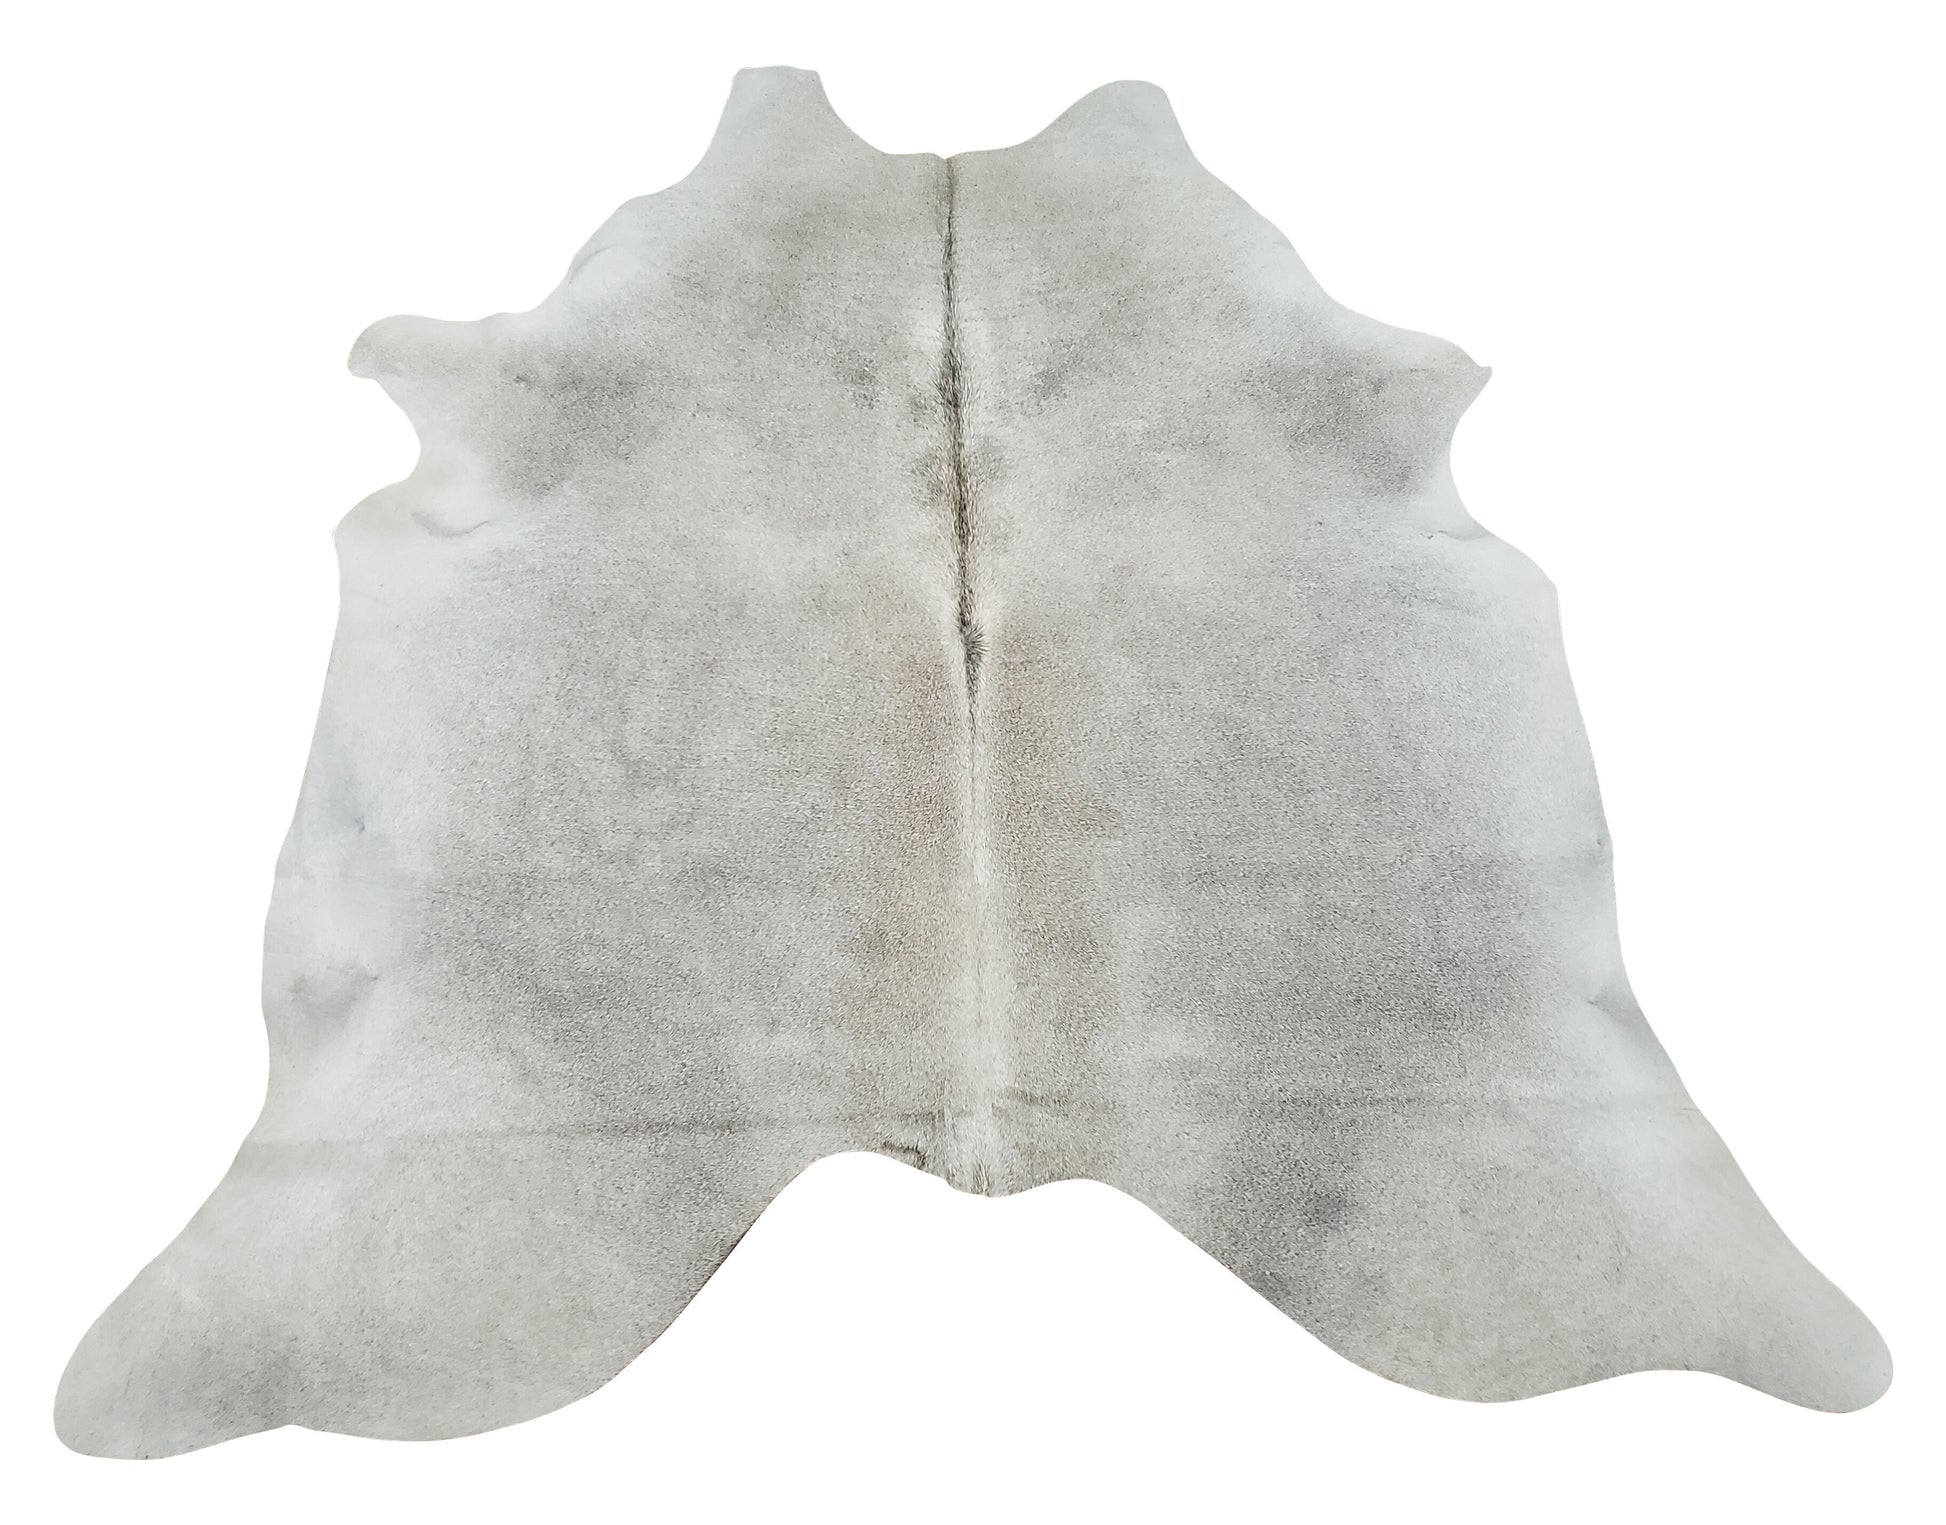 large gray cowhide rugs are becoming popular day by day even in spaces that aren't really a country style but modern, it brings a unique finishing to the house. 